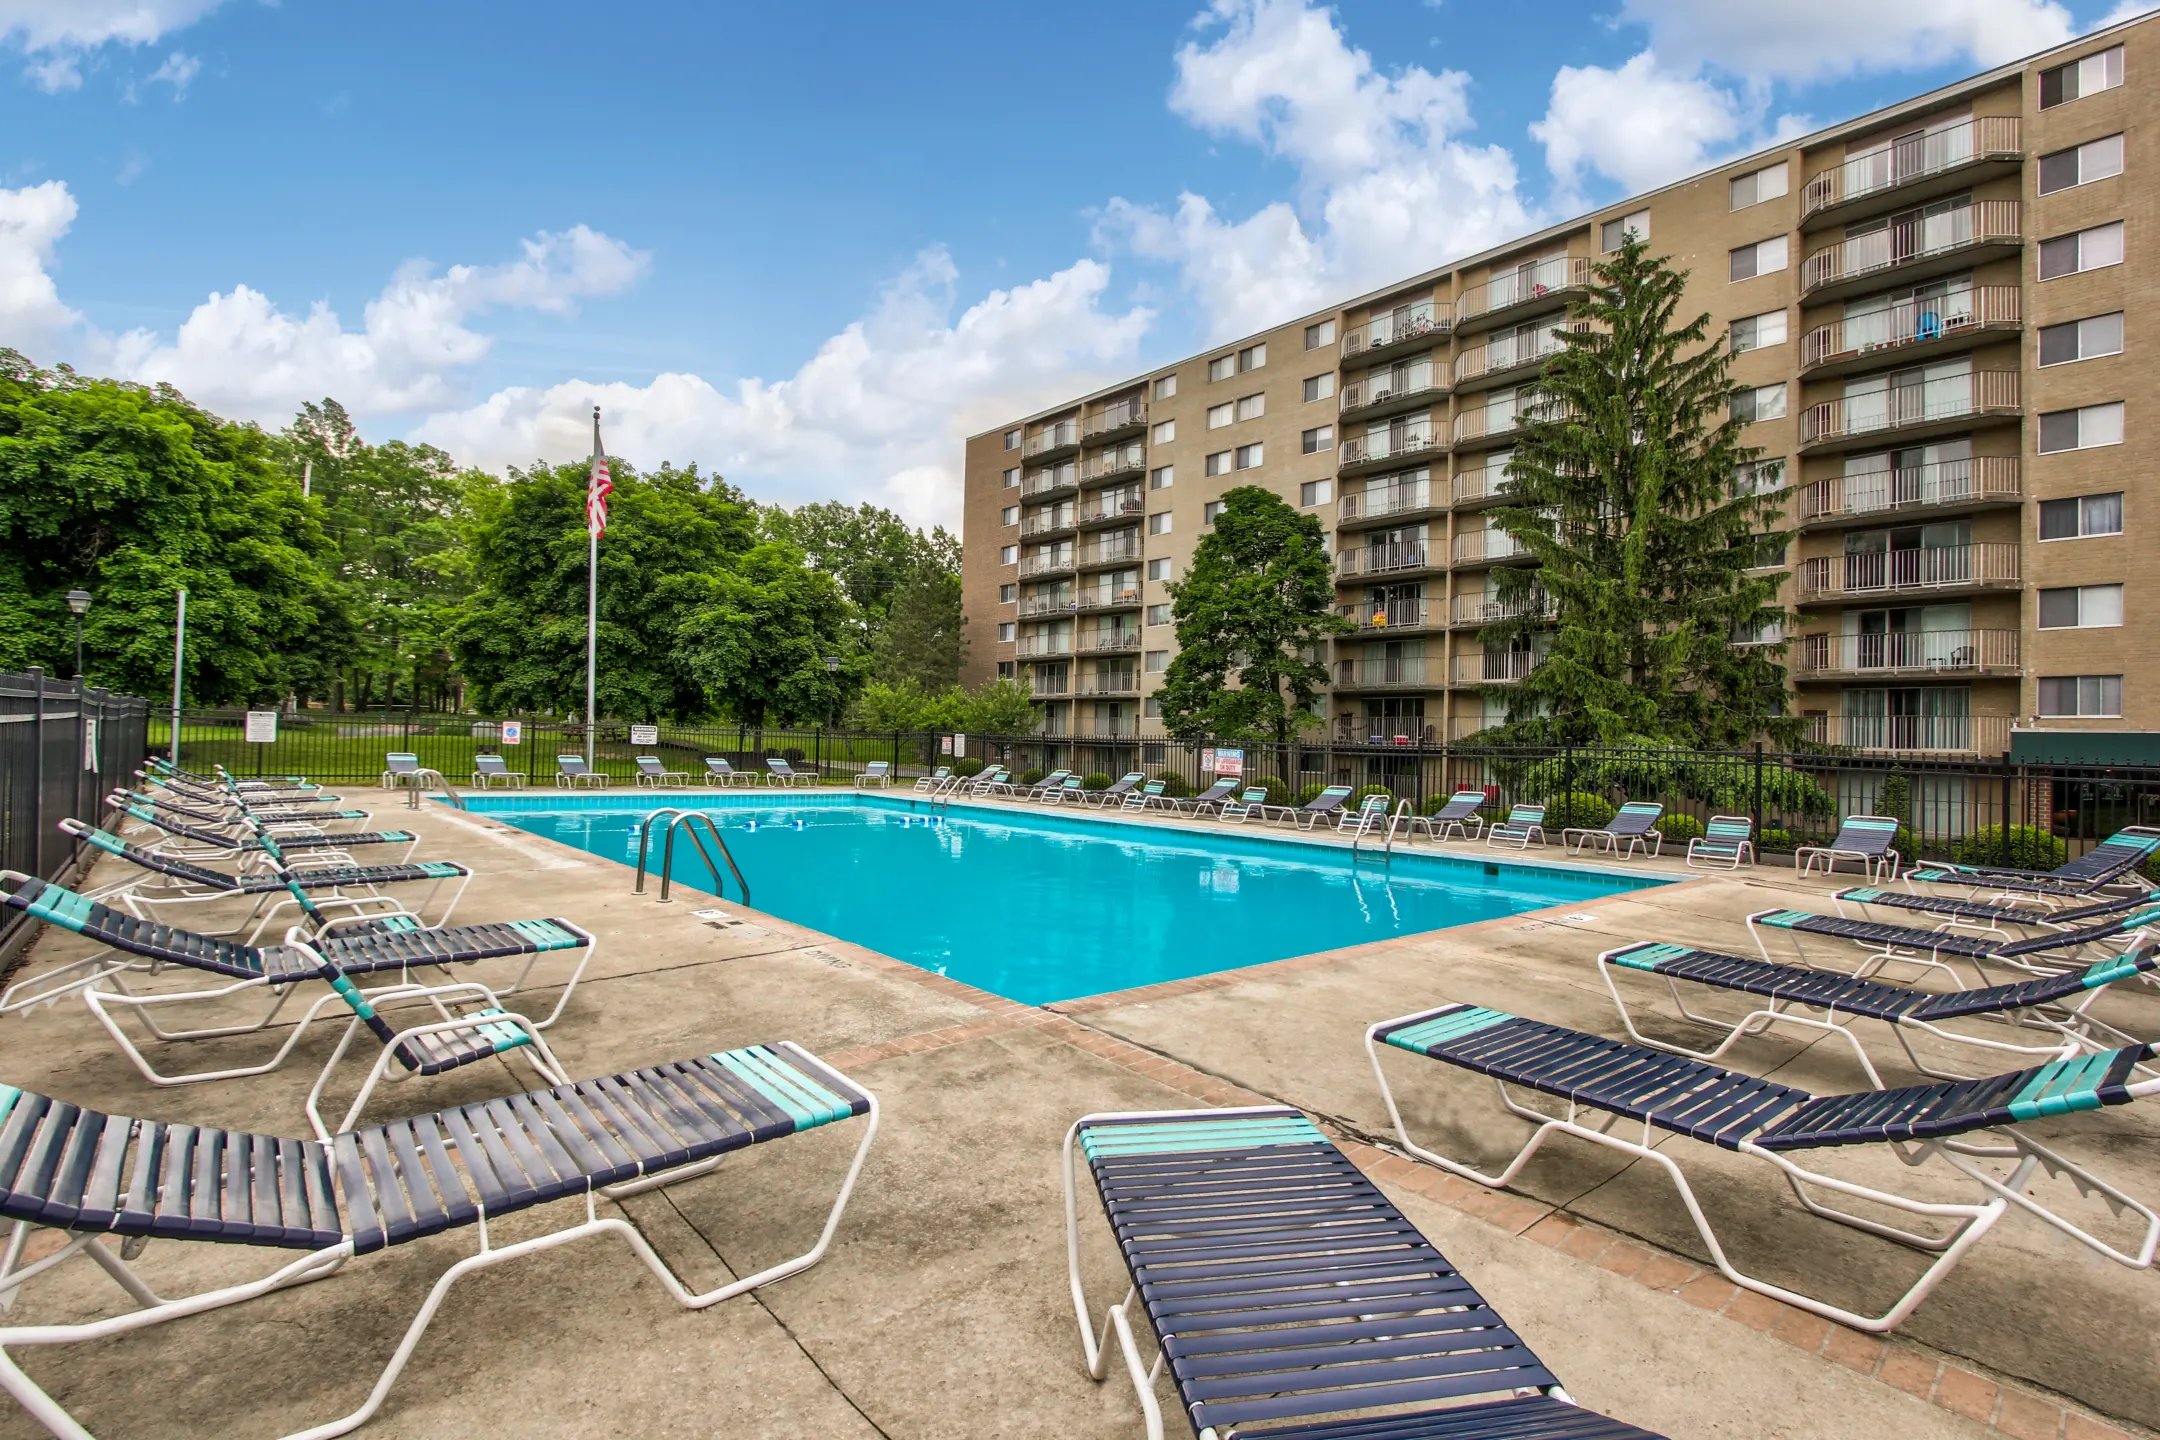 Pool - Portage Towers - Cuyahoga Falls, OH